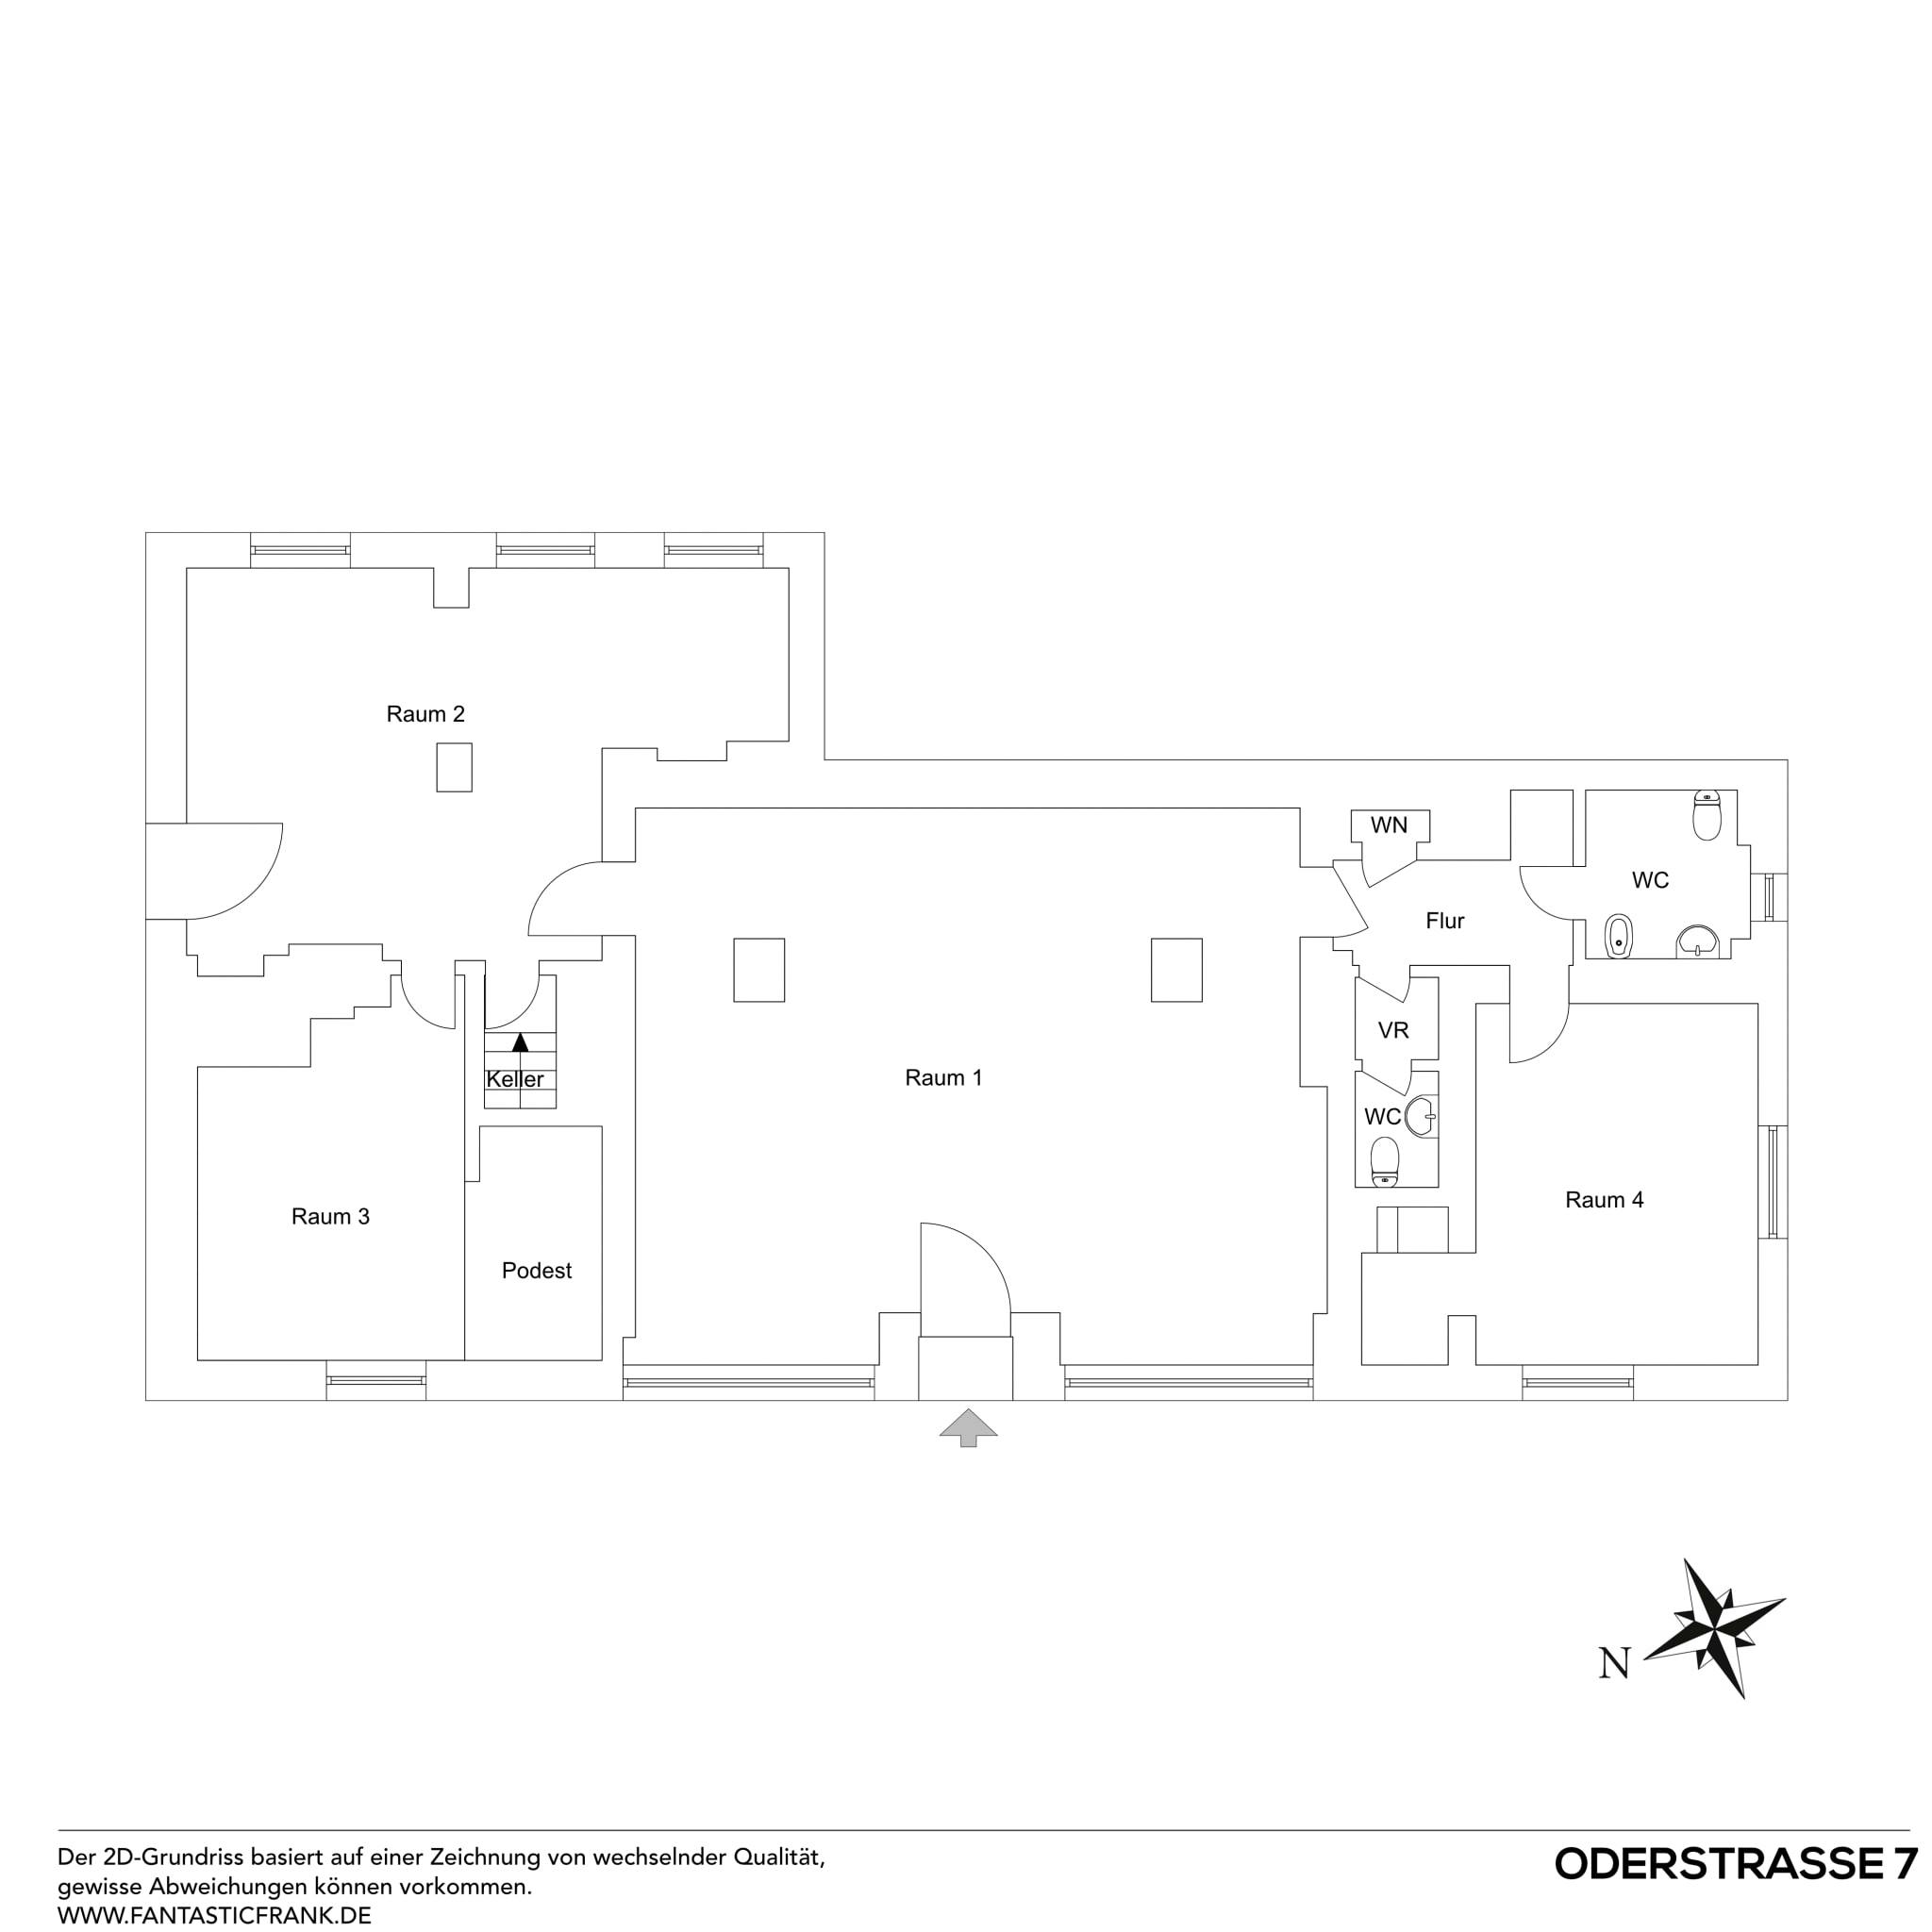 The image features a white floor plan with a black and white color scheme, which includes a living room, a kitchen, and a bedroom. The living room is located on the left side, while the kitchen is on the right side. The bedroom is situated in the middle of the floor plan.